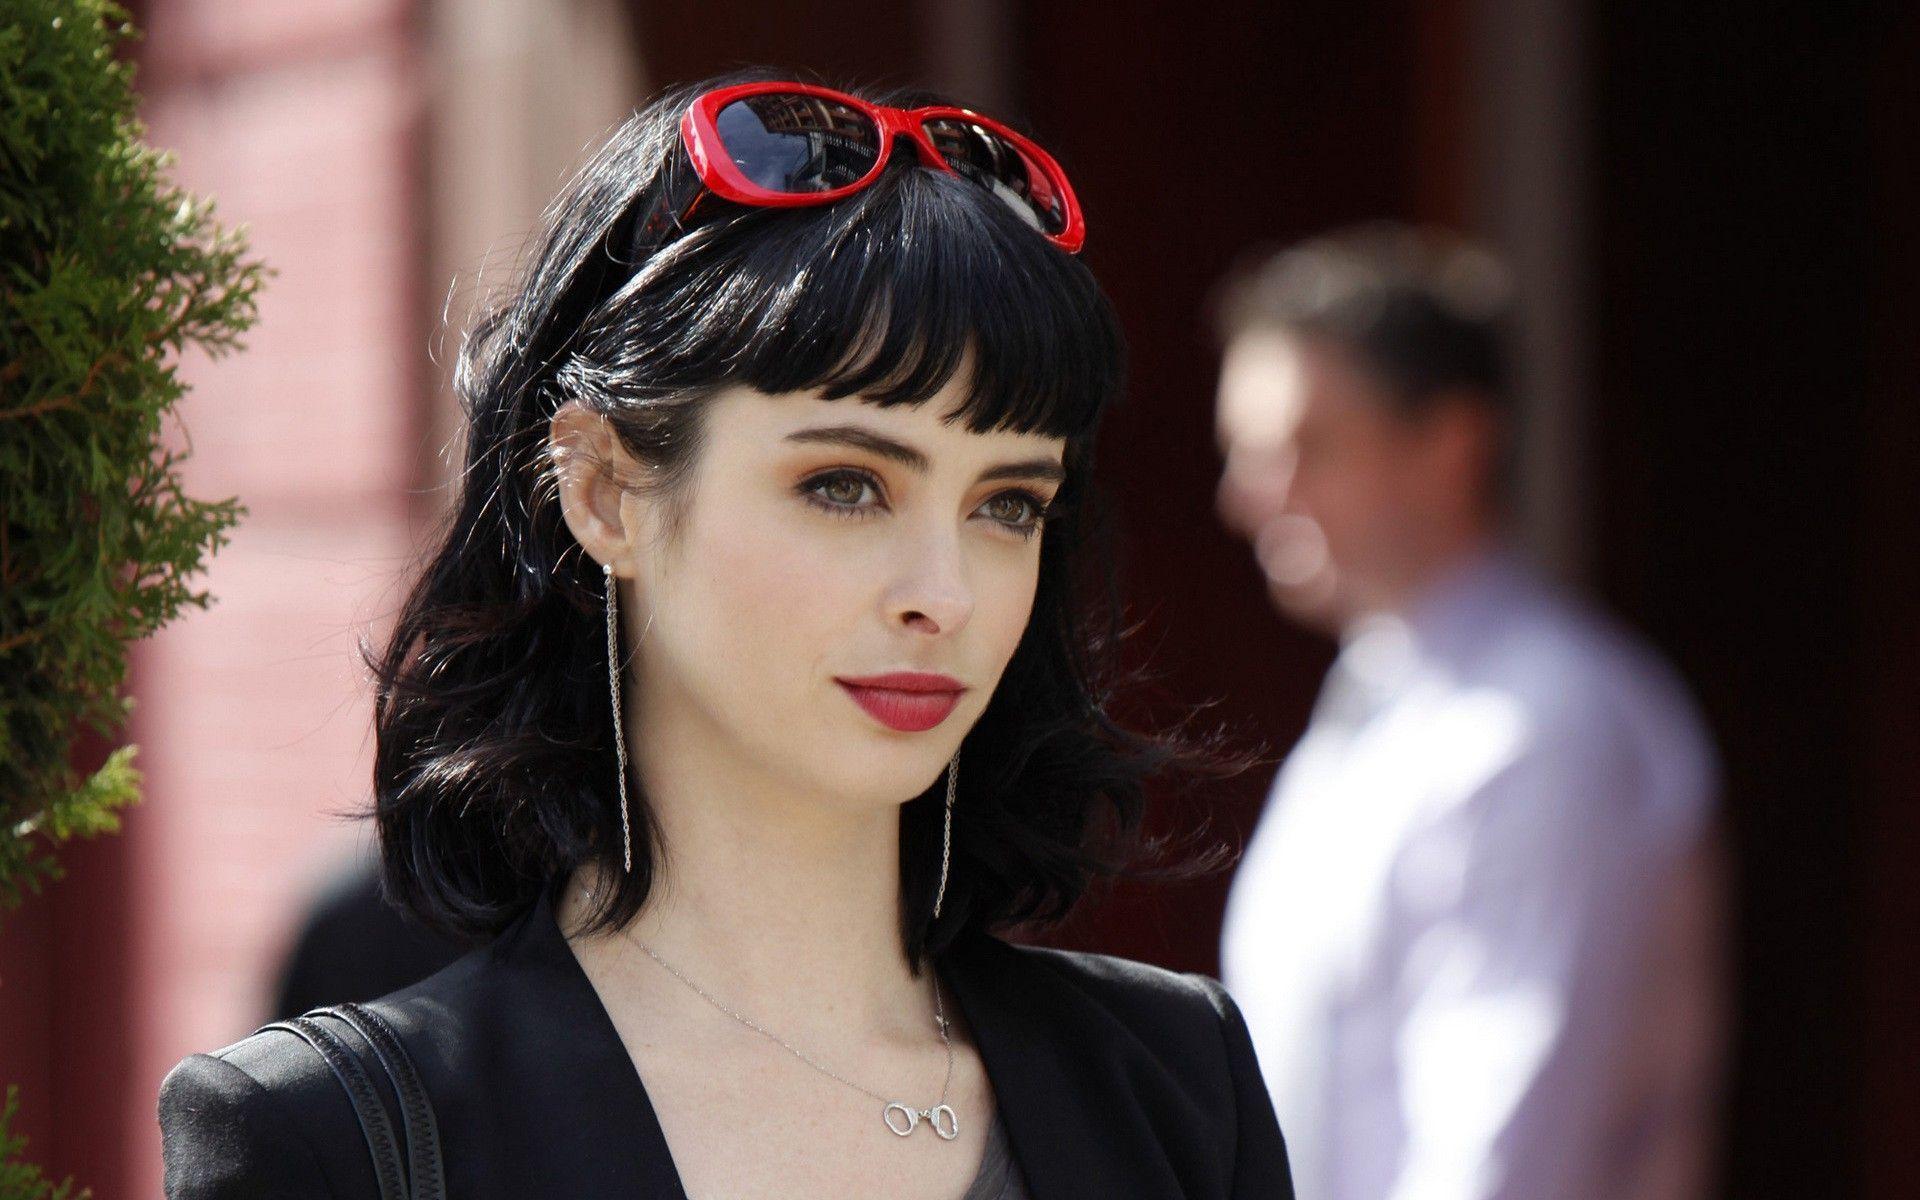 Krysten Ritter Lands the Lead Role in 'Marvel's A.K.A. Jessica